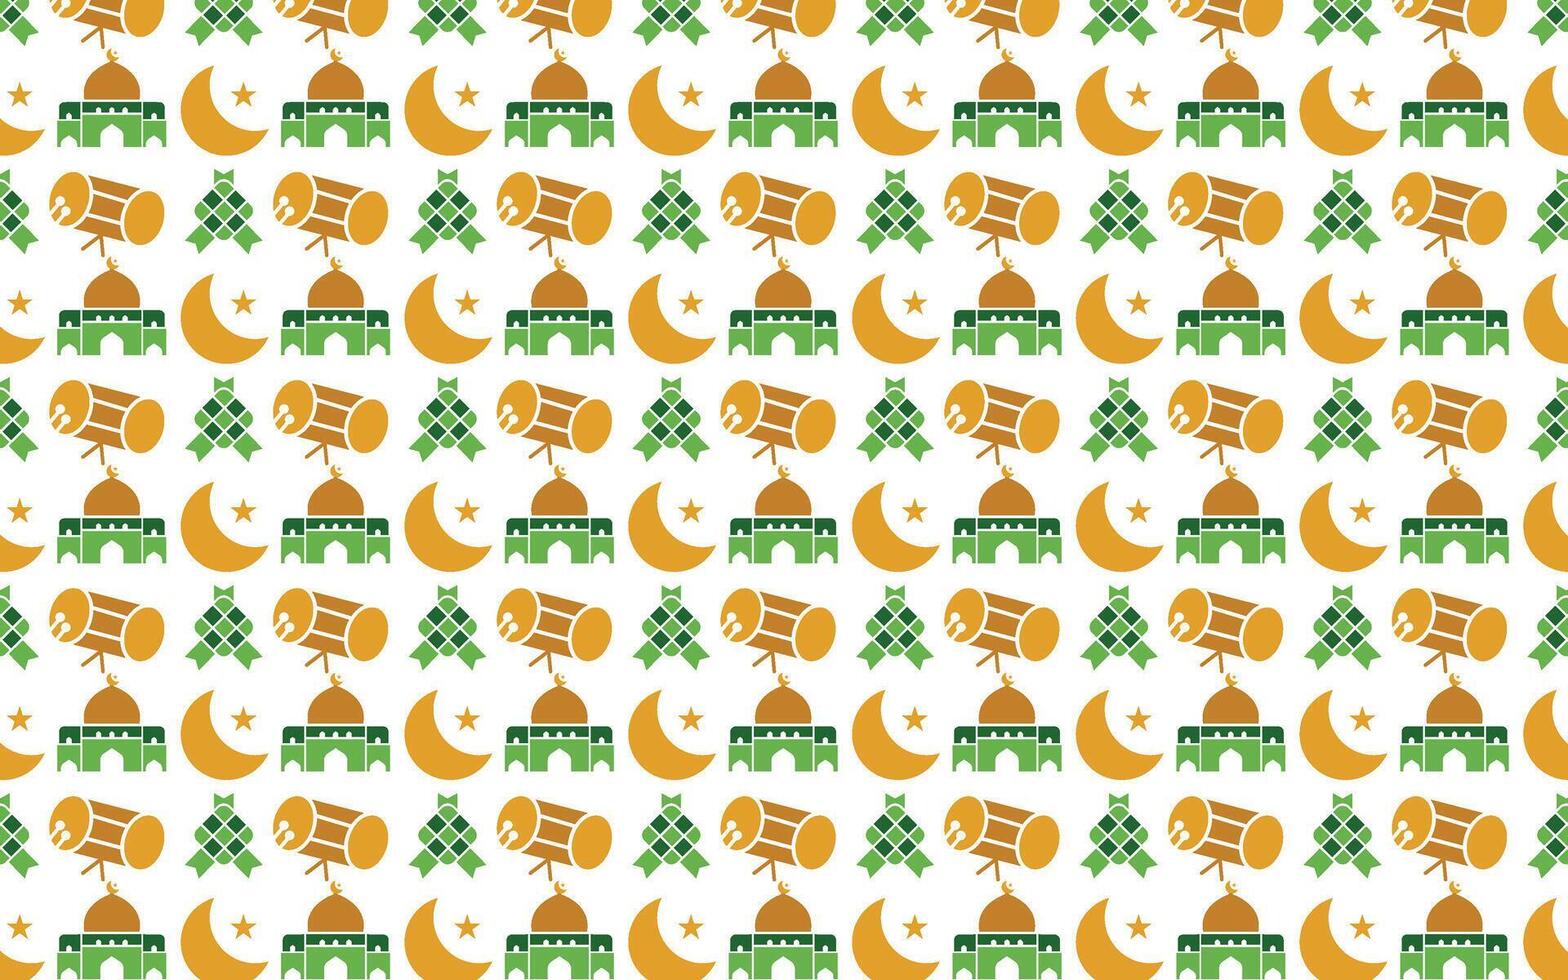 seamless pattern aidil fitri 1445 hijriah to celebrate Eid al-Fitr can be used as a book cover, congratulatory cover or wallpaper vector